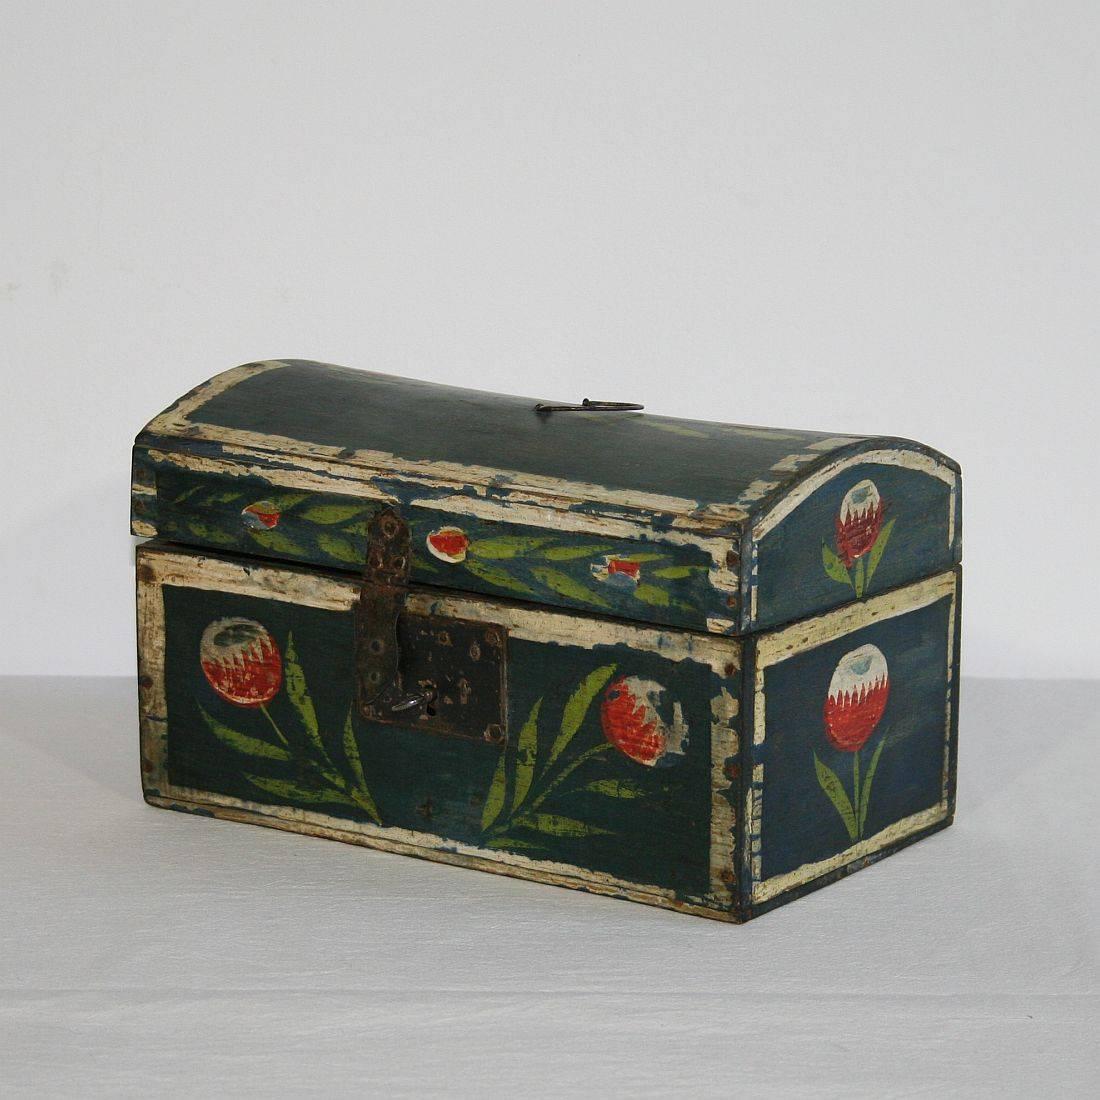 Thank you for looking at one of our selected items on 1st Dibs.
We are able to offer our unique and original antiques at the most competitive price level on this platform due to the fact that we are travelling through France every month and hand